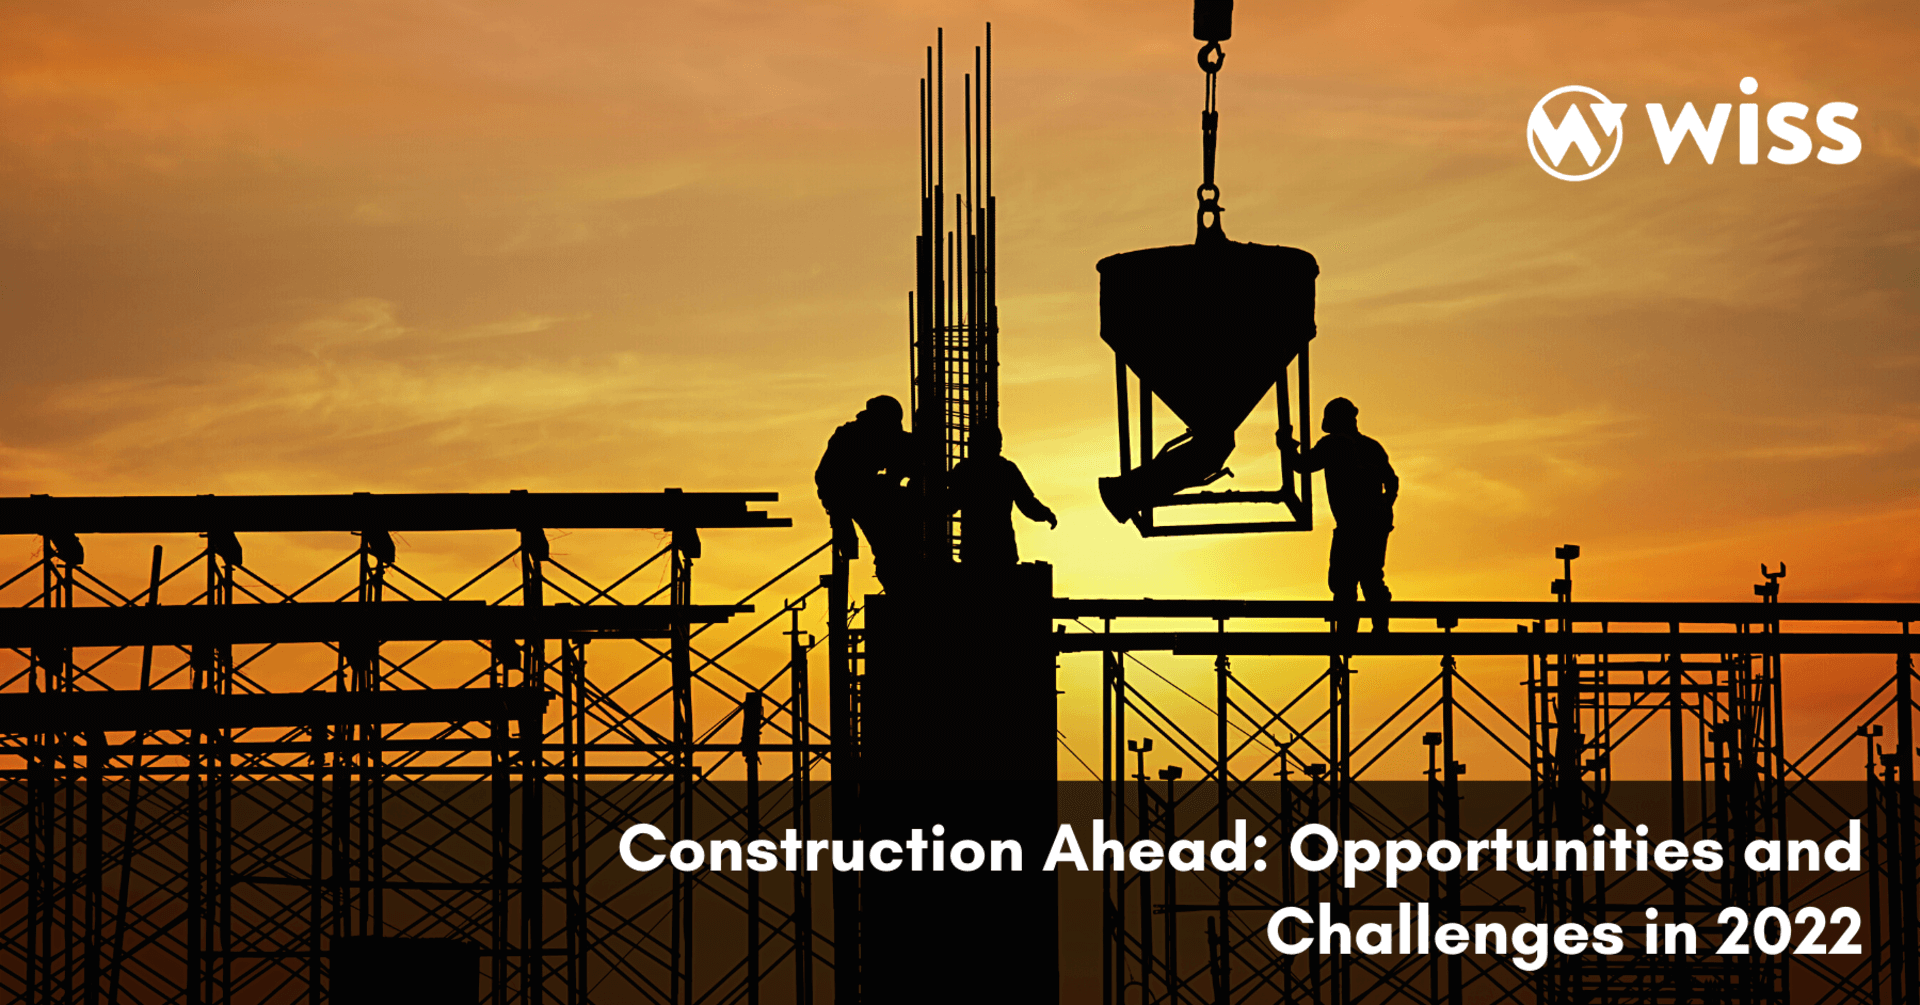 Construction Ahead: Opportunities and Challenges in 2022